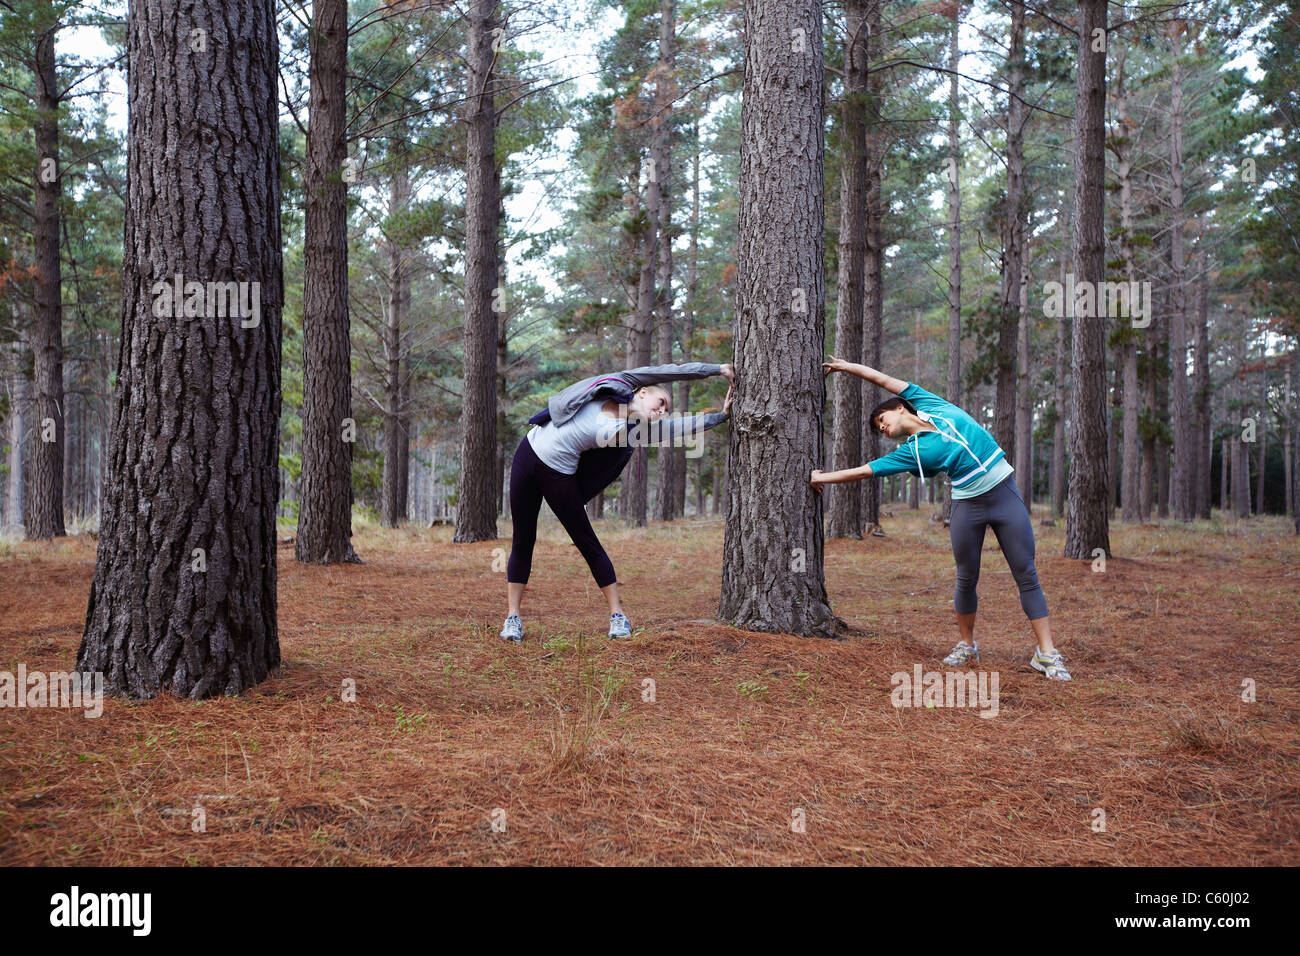 Runners stretching in forest Stock Photo